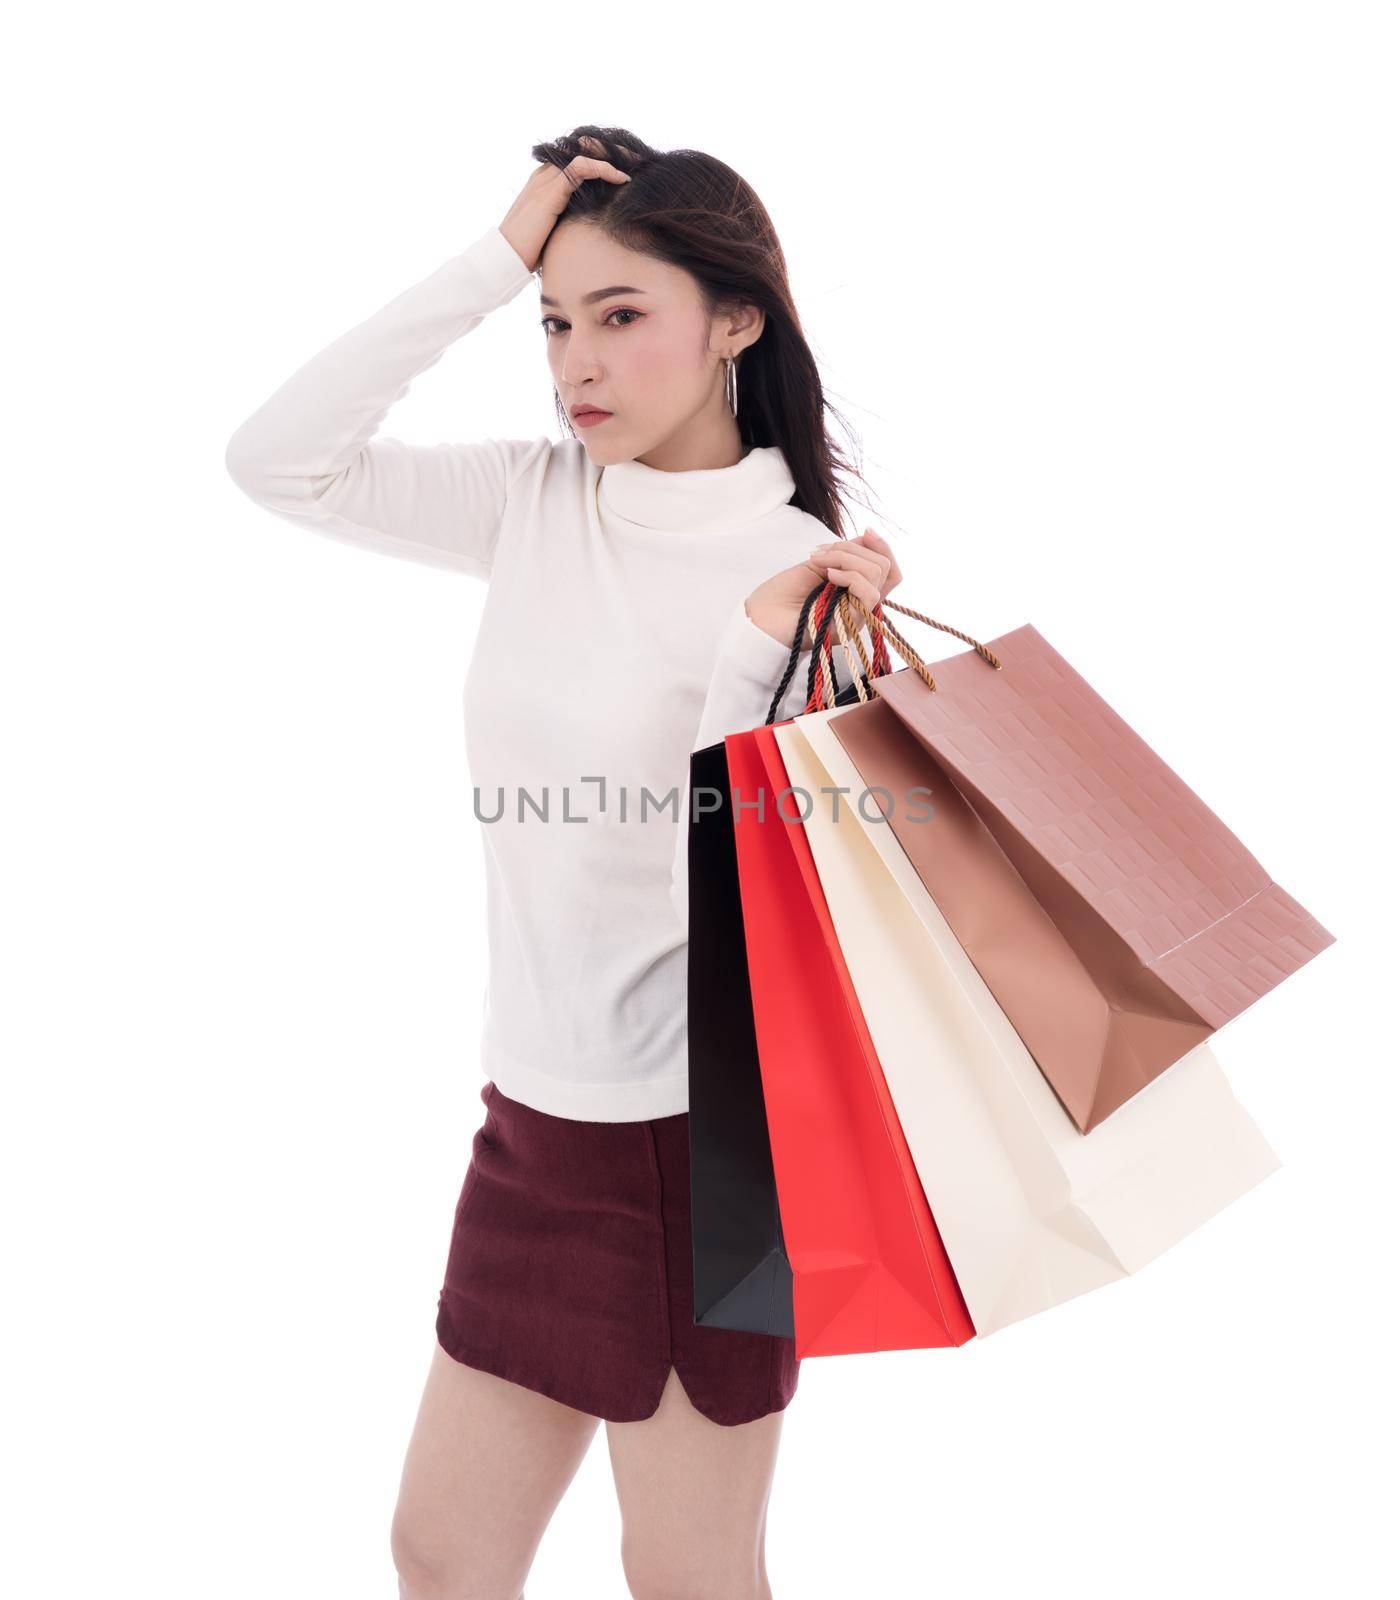 stressed woman holding shopping bag isolated on white background by geargodz